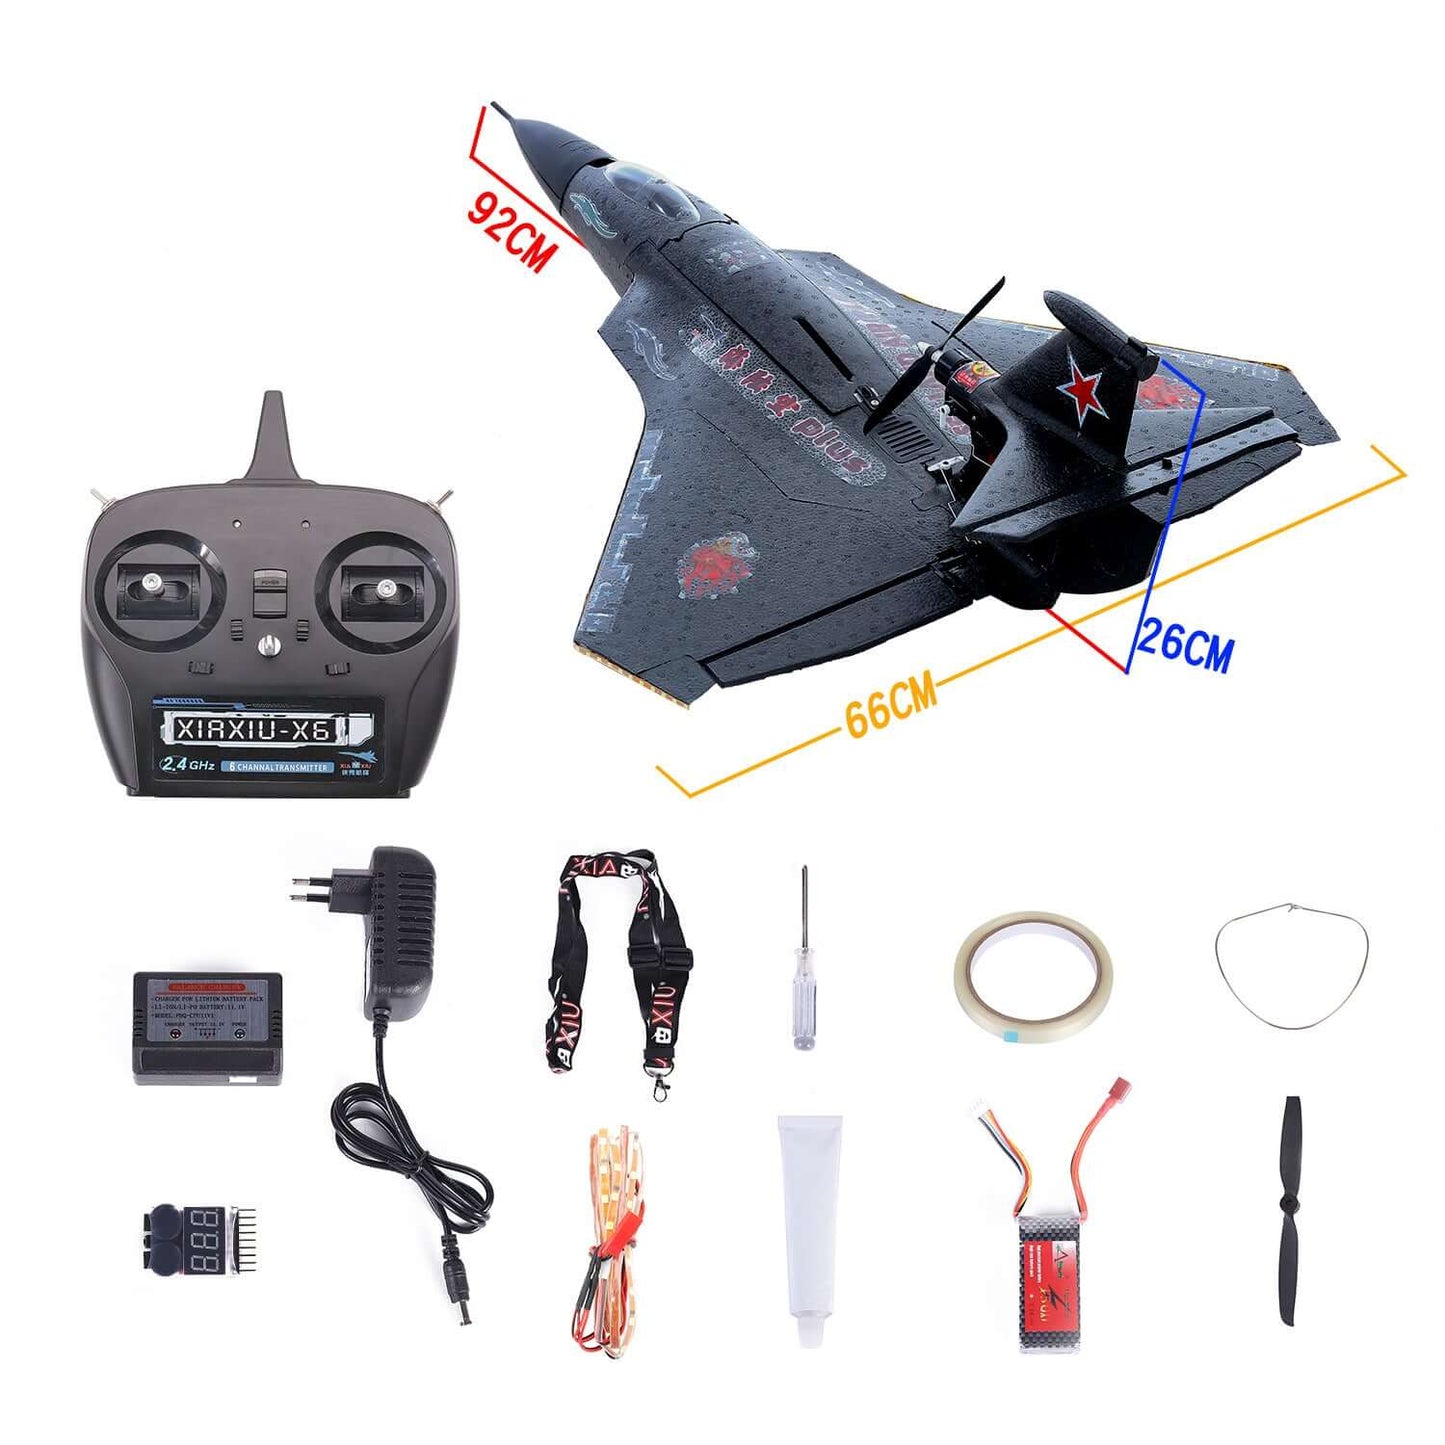 Sea Land And Air 3 in 1 Large RC Glider Plane 95CM 2.4G 2000M Waterproof Brushless Power Drop Resistant Remote Control Aircraft | Kidstoylover